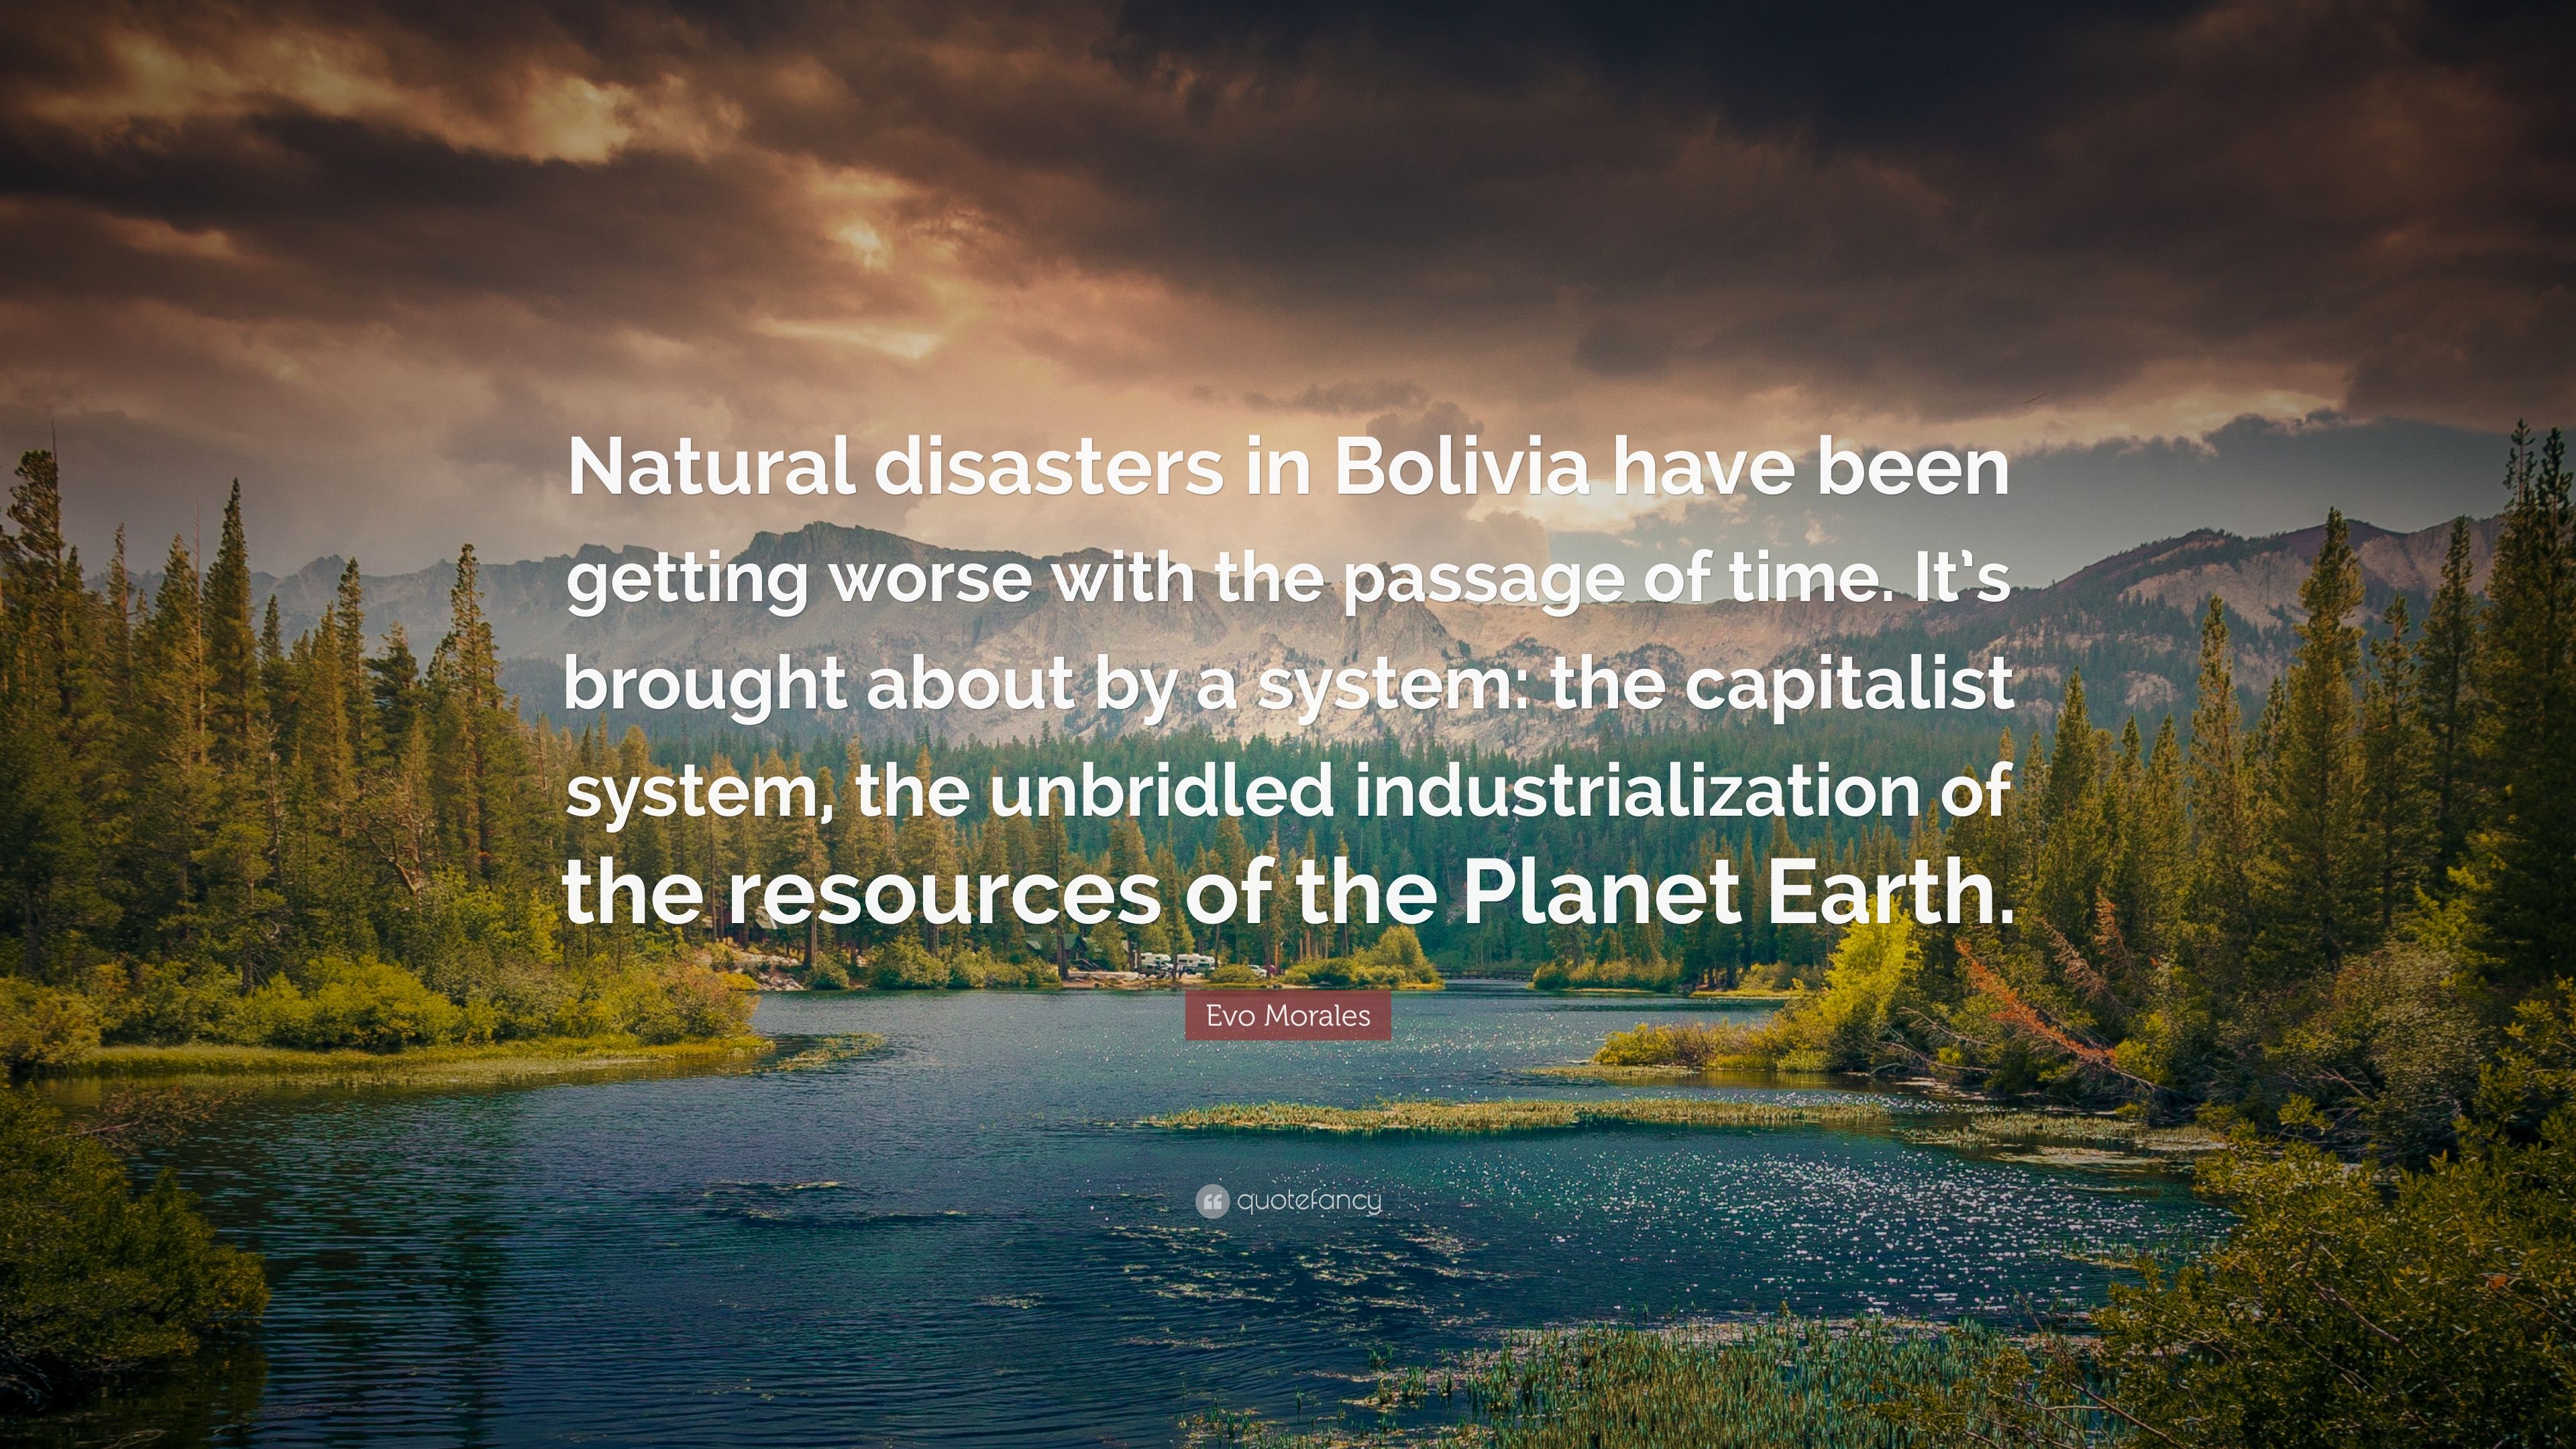 Evo Morales Quote: “Natural disasters in Bolivia have been getting